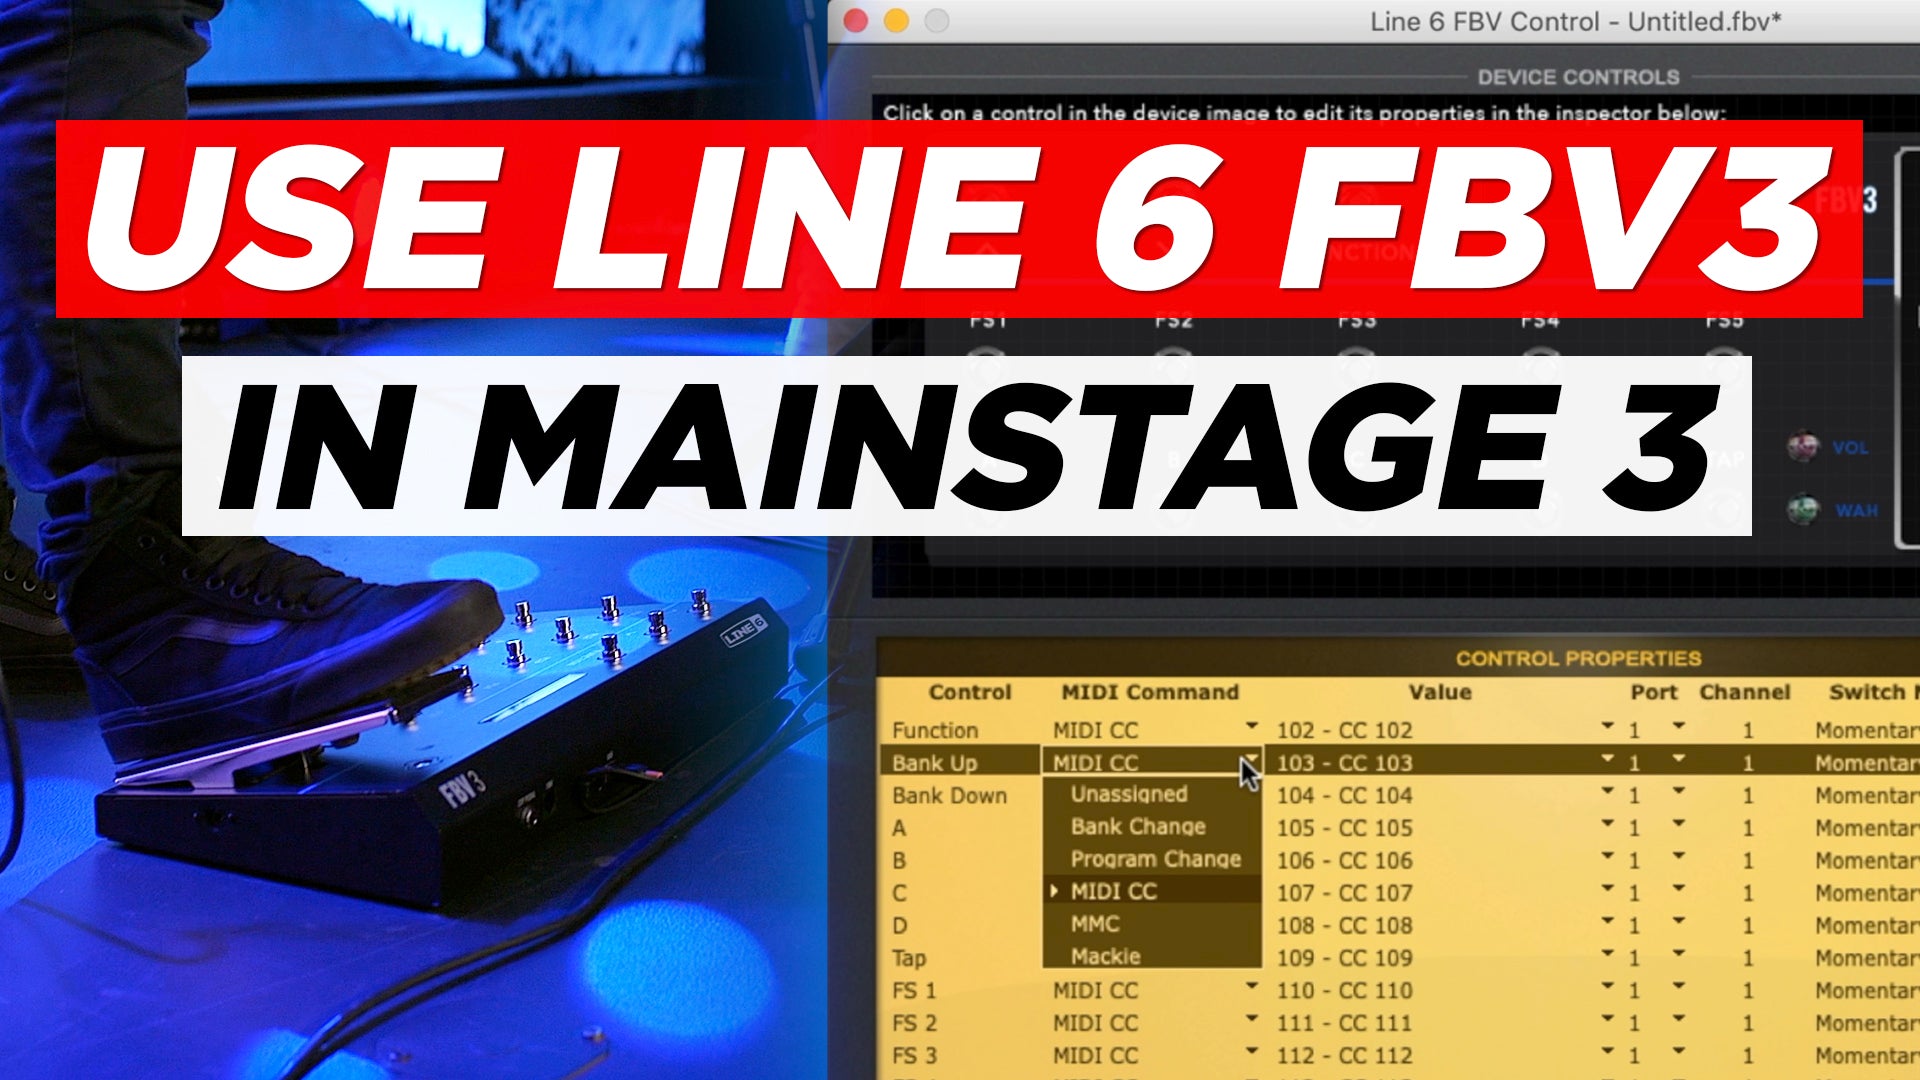 How to use the Line 6 FBV3 in MainStage 3